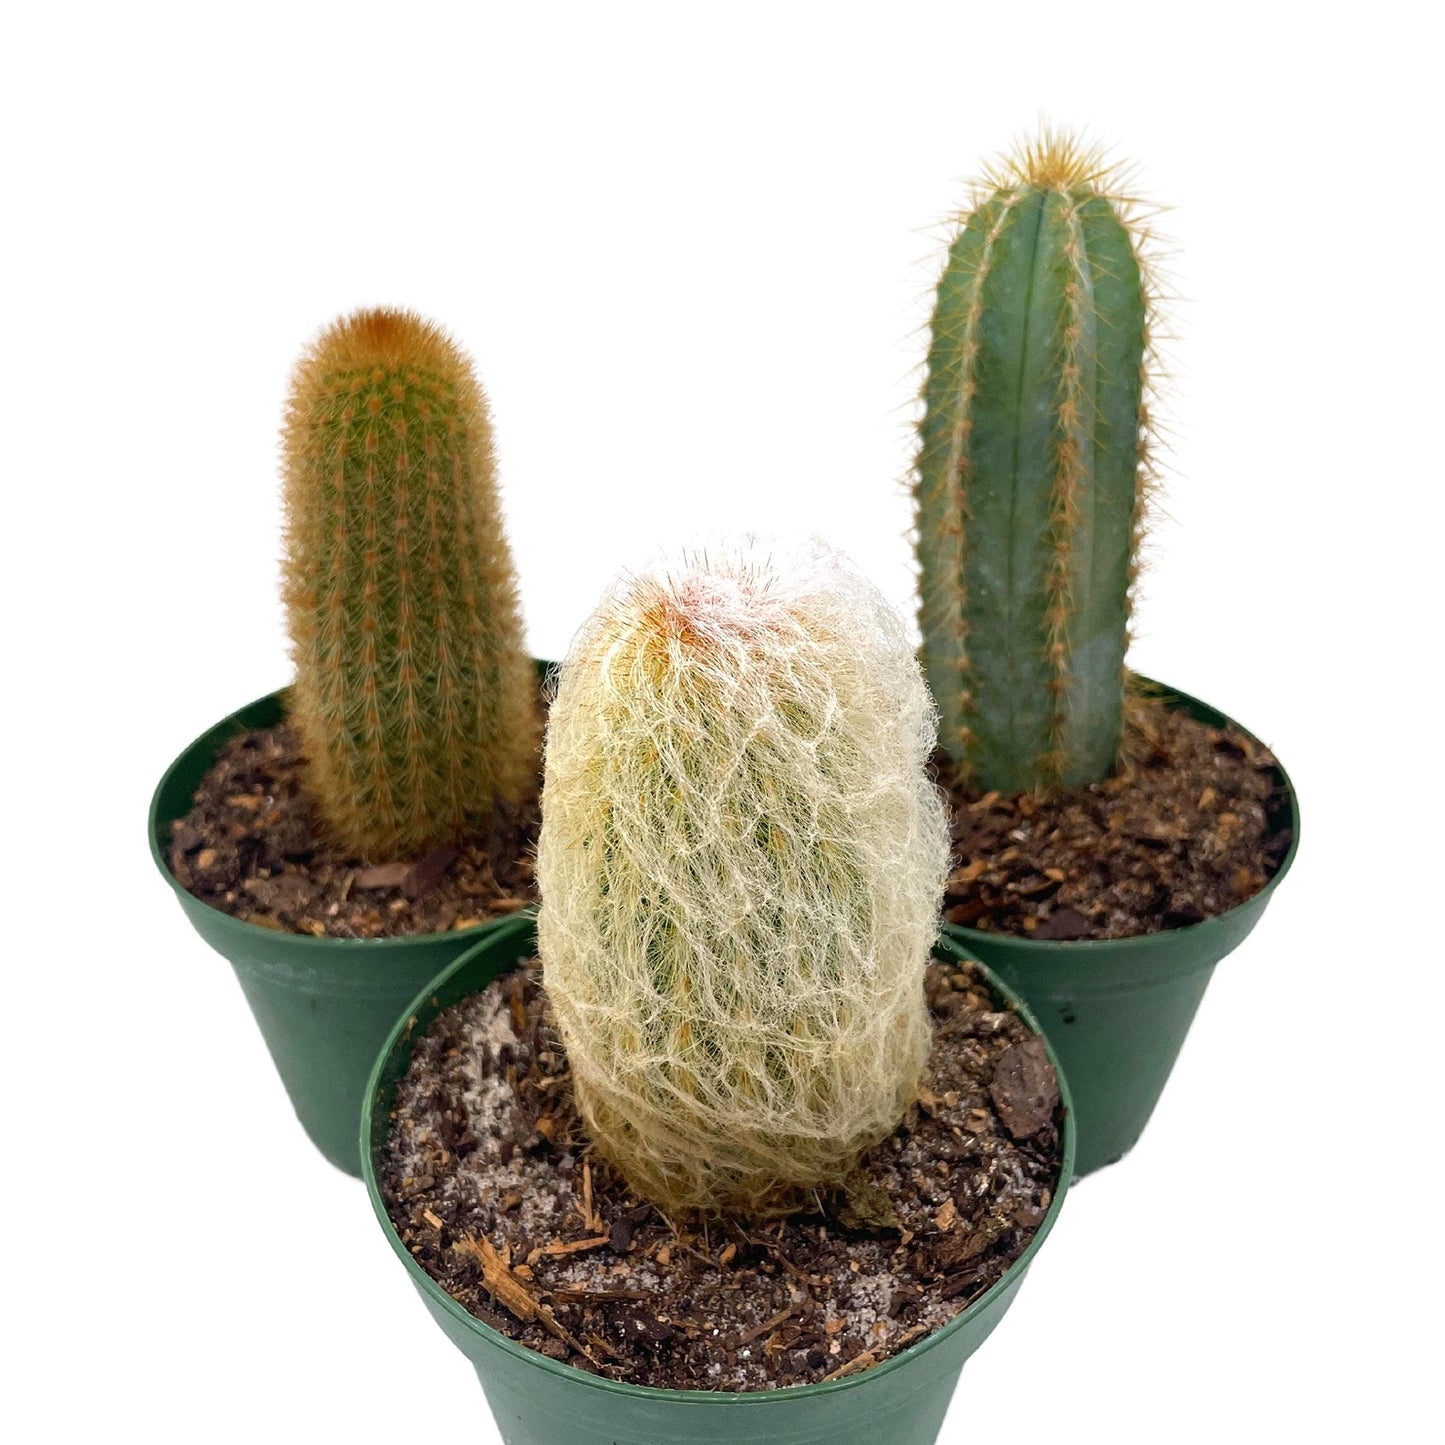 Column Cactus Assortment, 4 inch Set of 3, Silver Torch, Blue Column, Yellow, Old Man Fuzzy, Variety Cacti